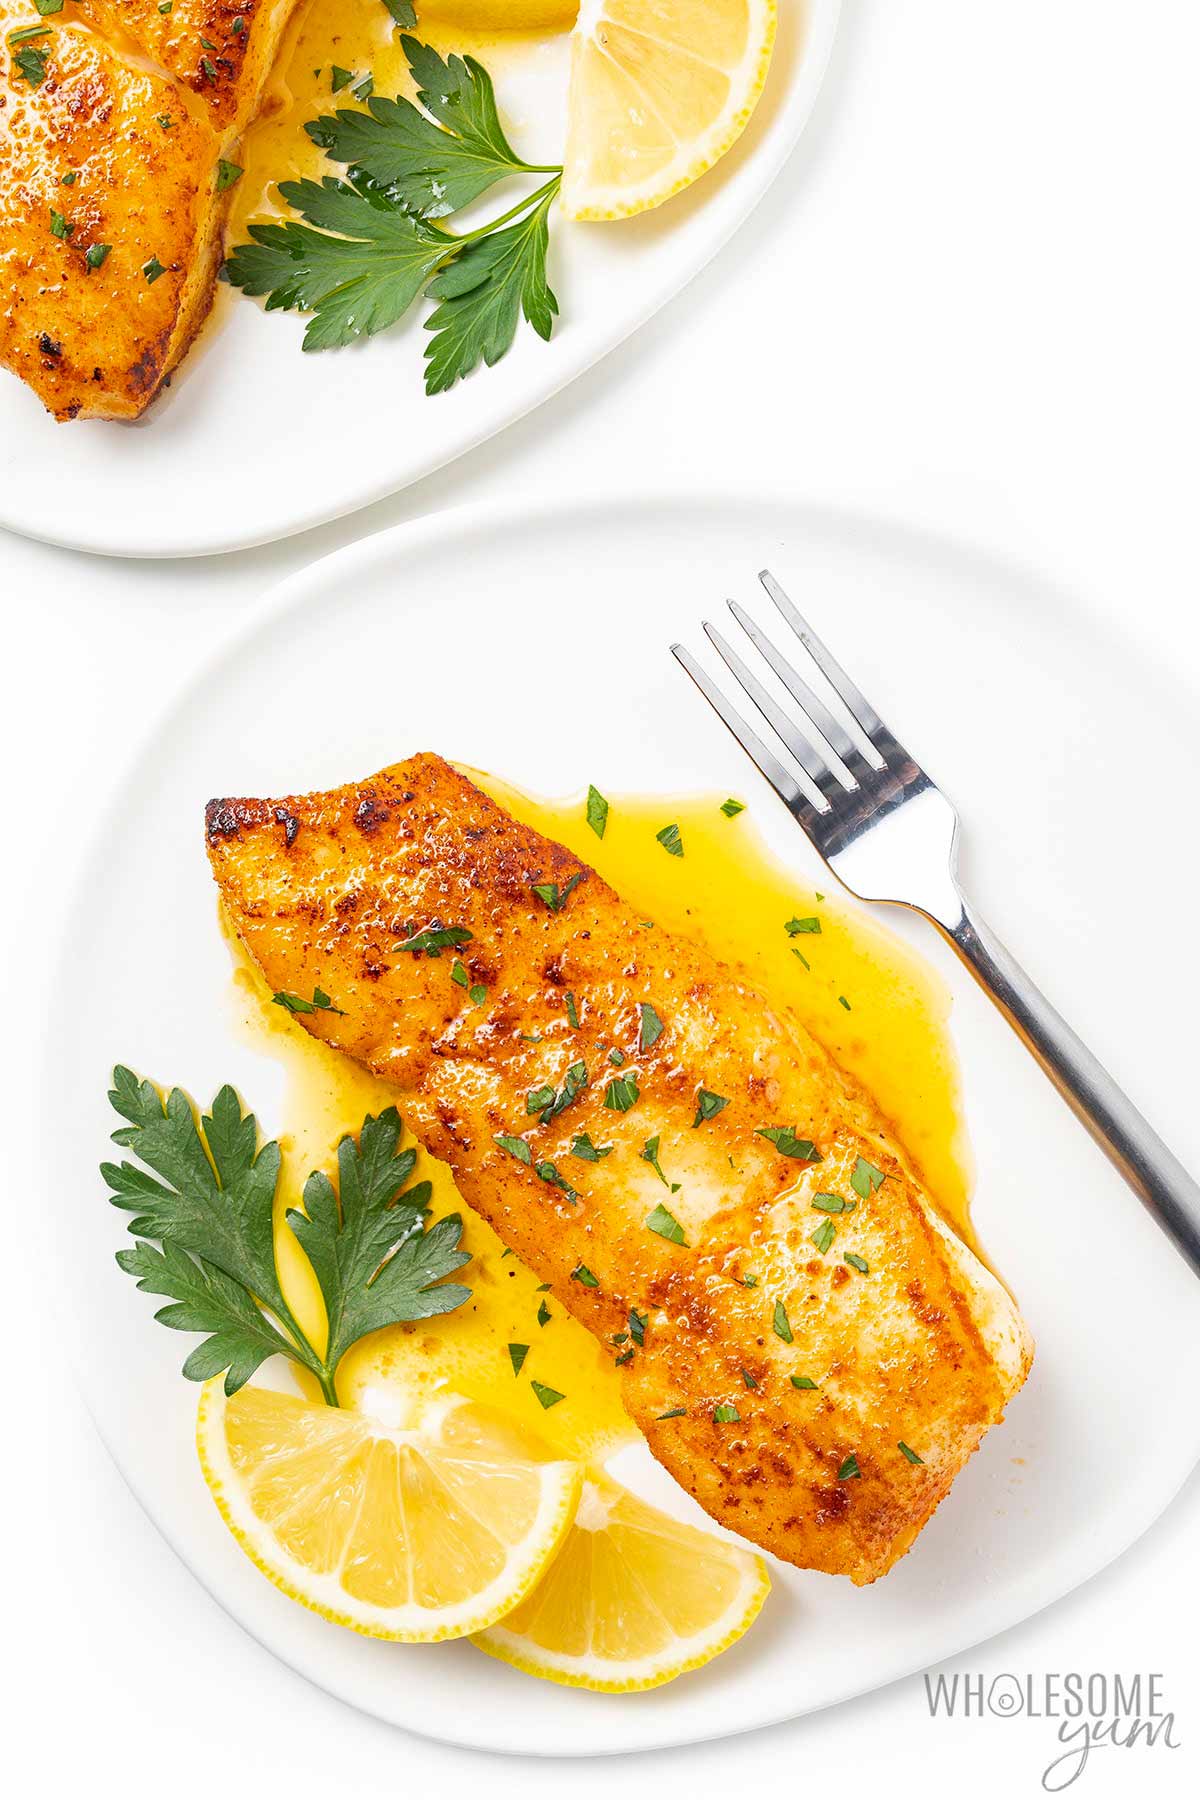 One of the best halibut recipes on a plate.